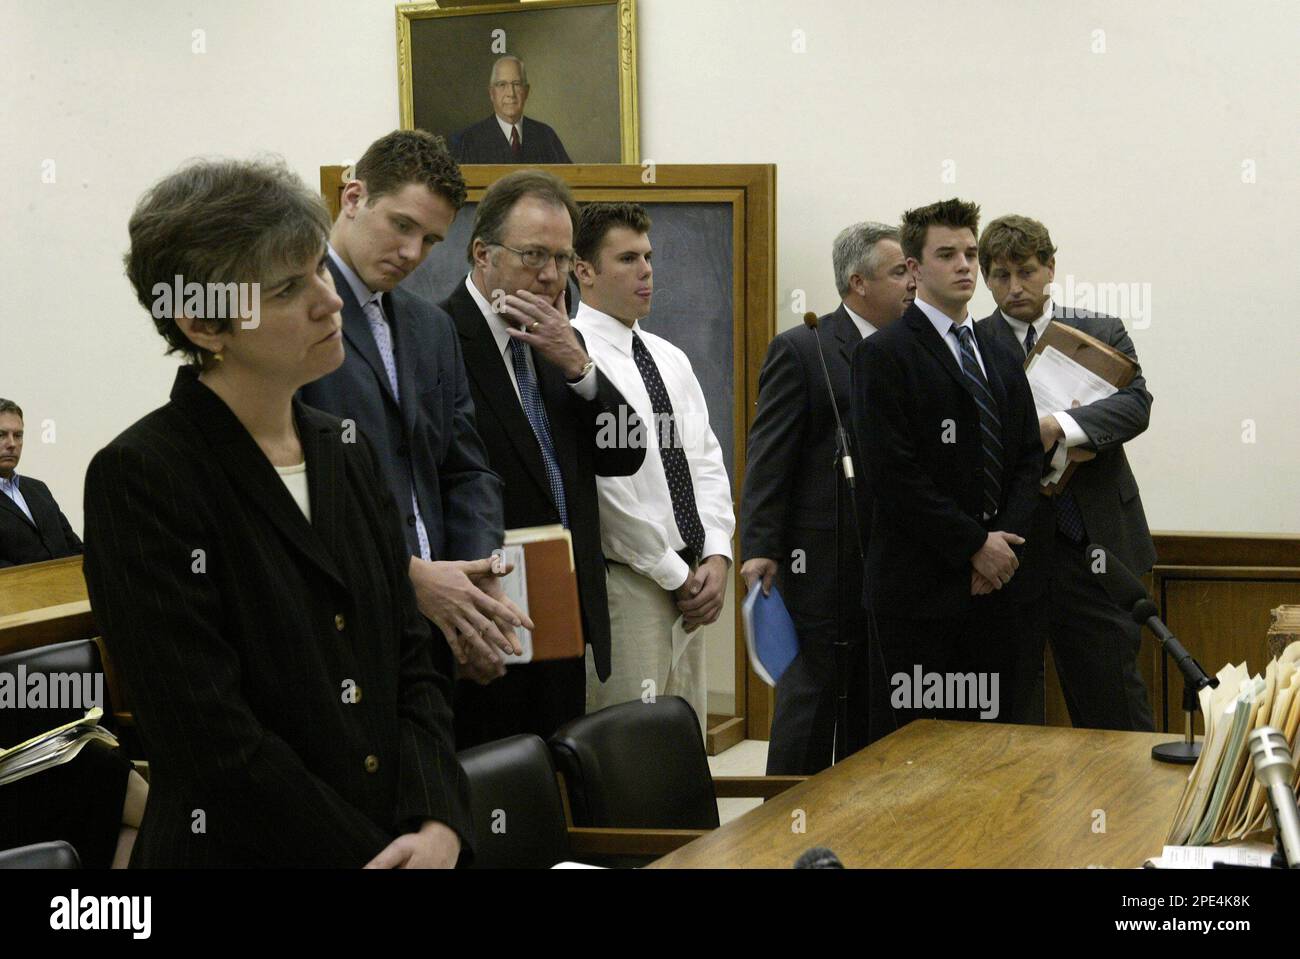 Norfolk County Assistant District Attorney Jean Marie Carroll, left, talks  with Judge Mark S. Coven during the arraignment of former Milton Academy  students Pasko Skarica, second from left; Jay Driscoll, white shirt,